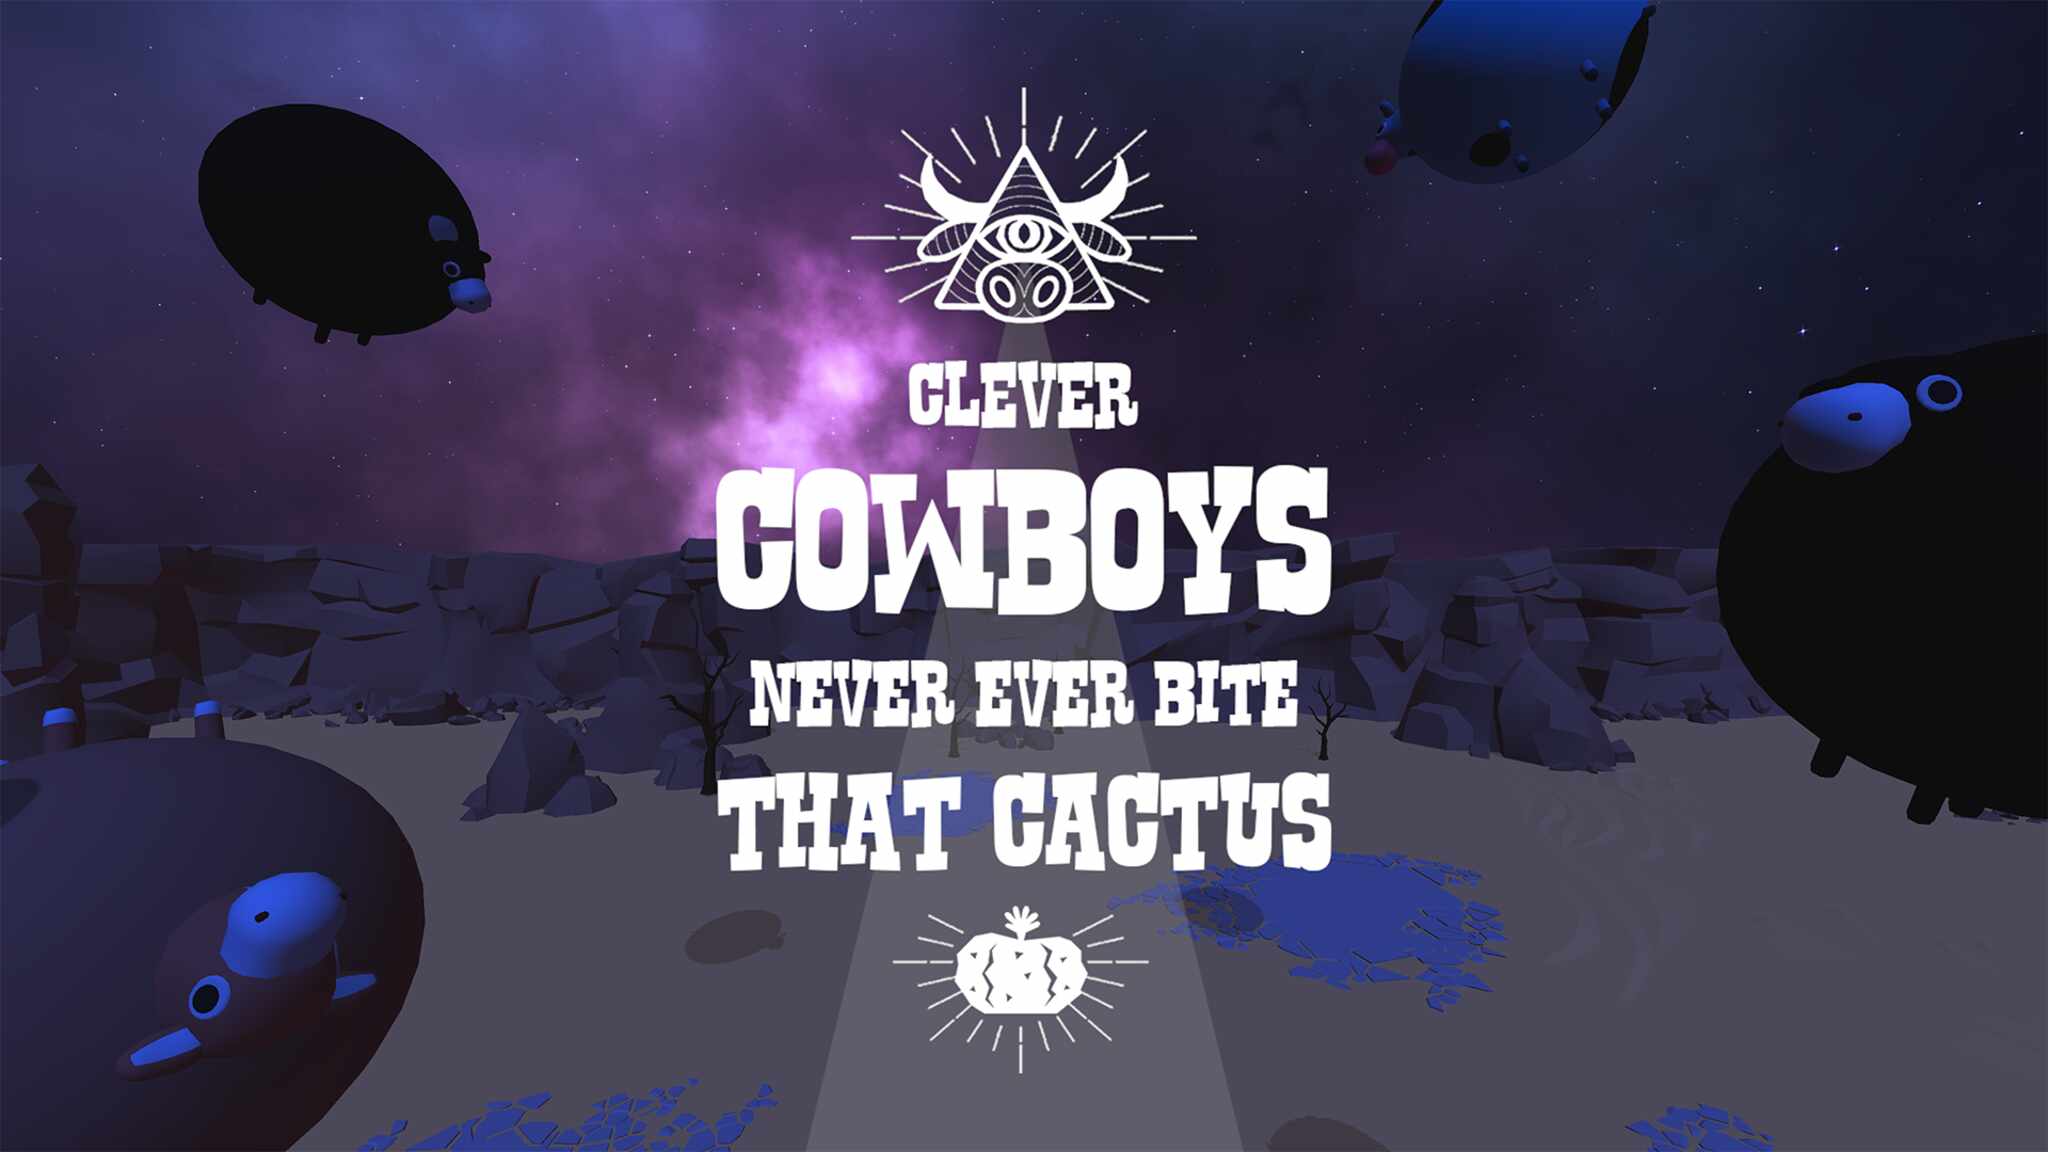 Clever Cowboys Never Ever Bite That Cactus